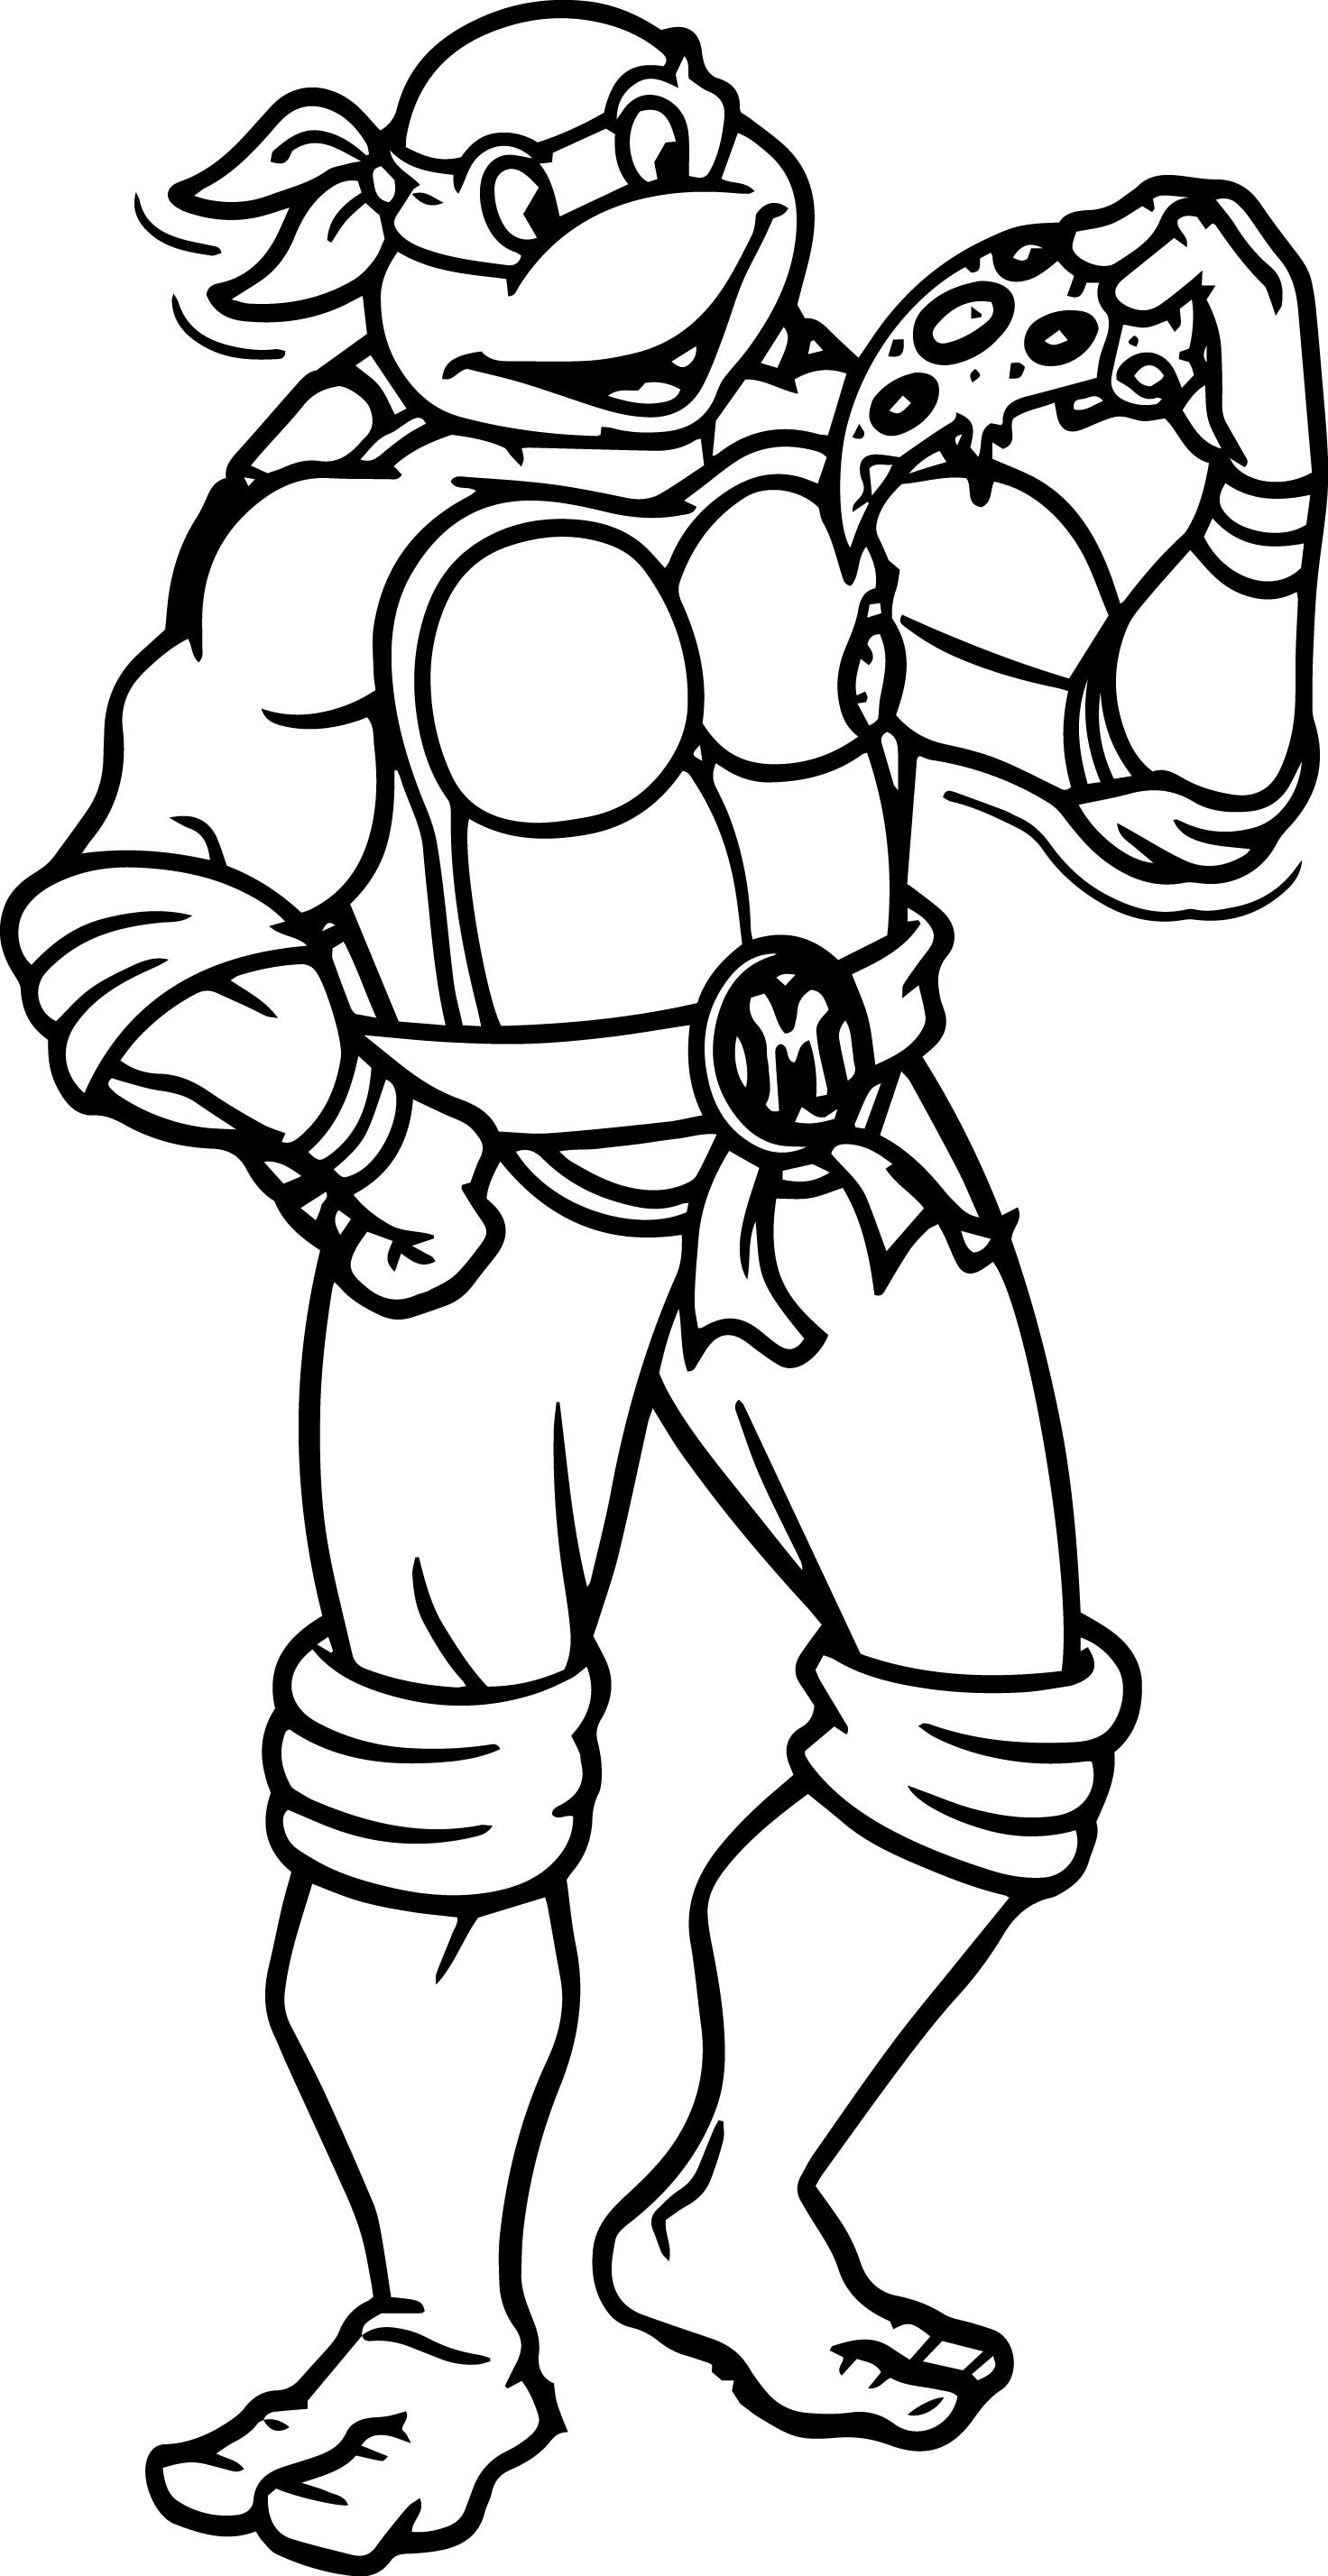 Coloring Pages For Boys Ninja Turltes
 Teenage Mutant Ninja Turtle Coloring Pages coloringsuite